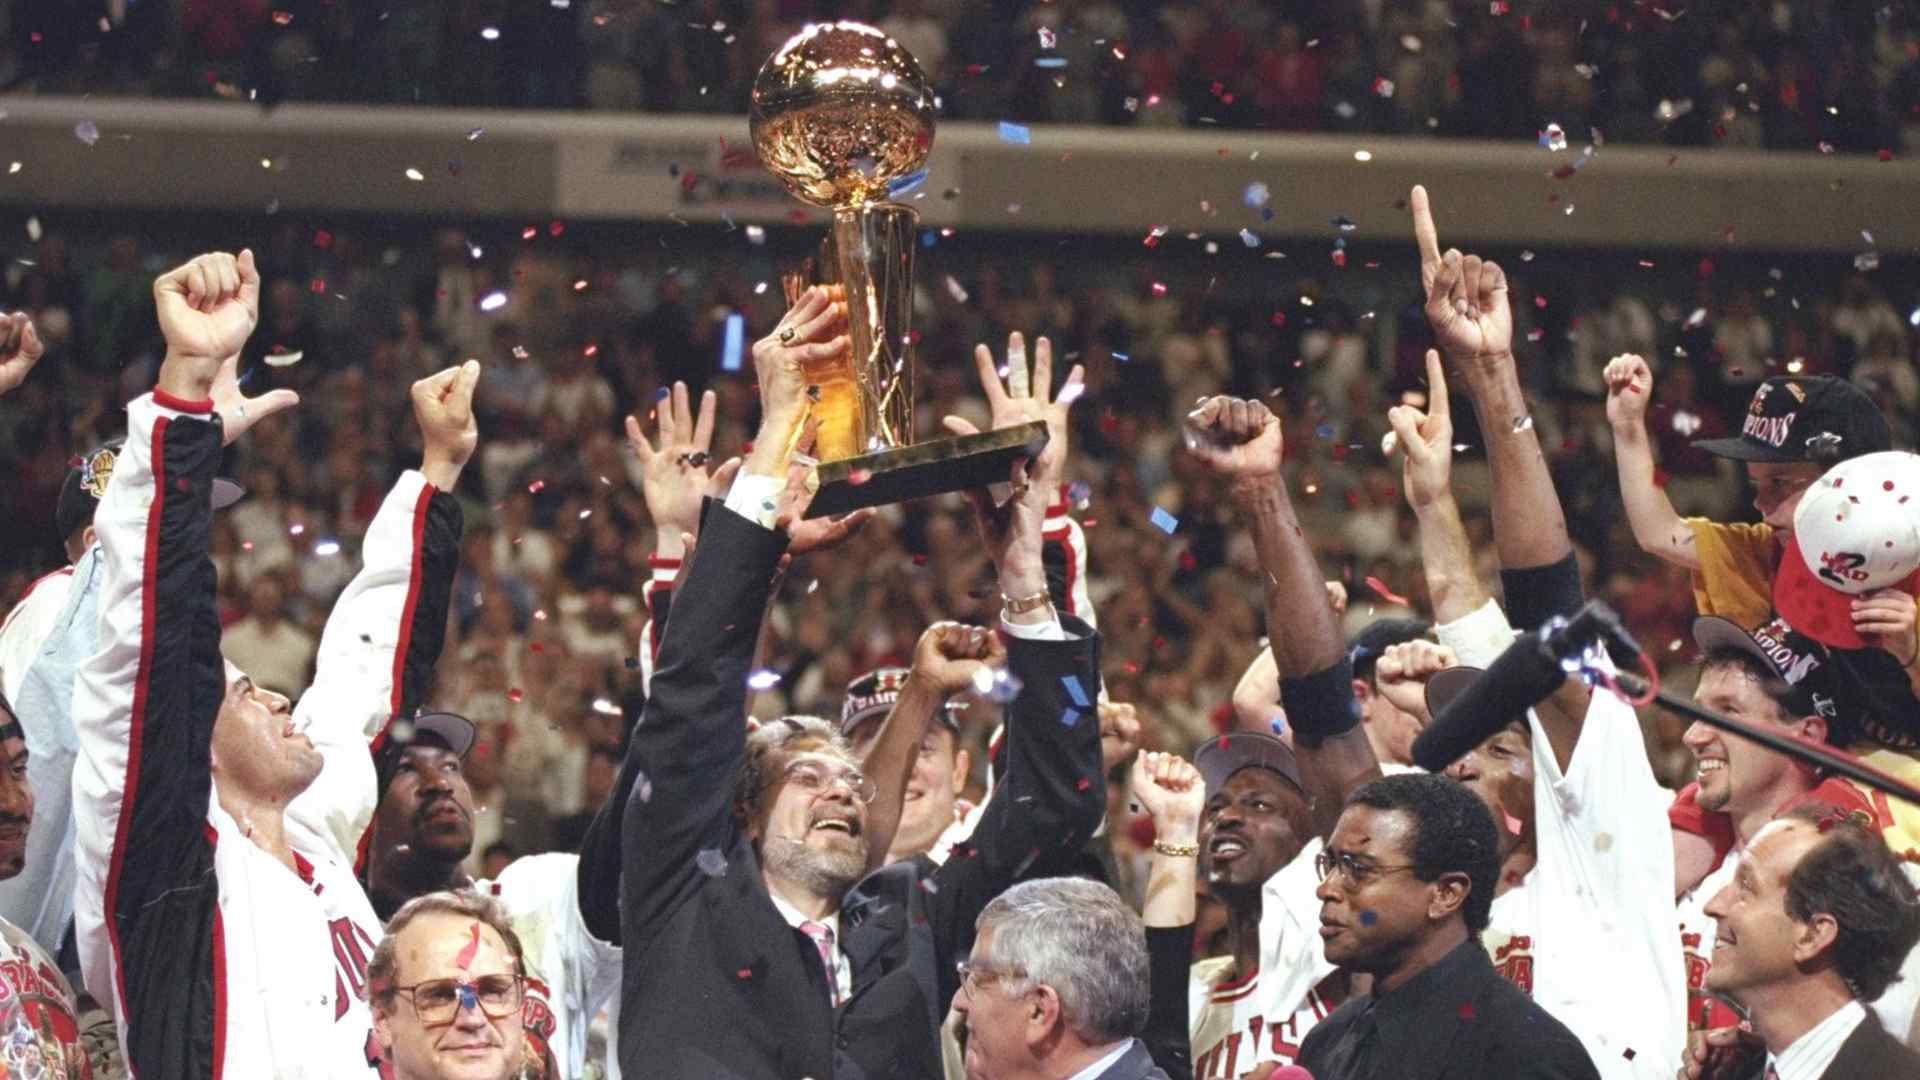 The Chicago Bulls lifting the NBA trophy. (Image credit: facecbook/NBA)